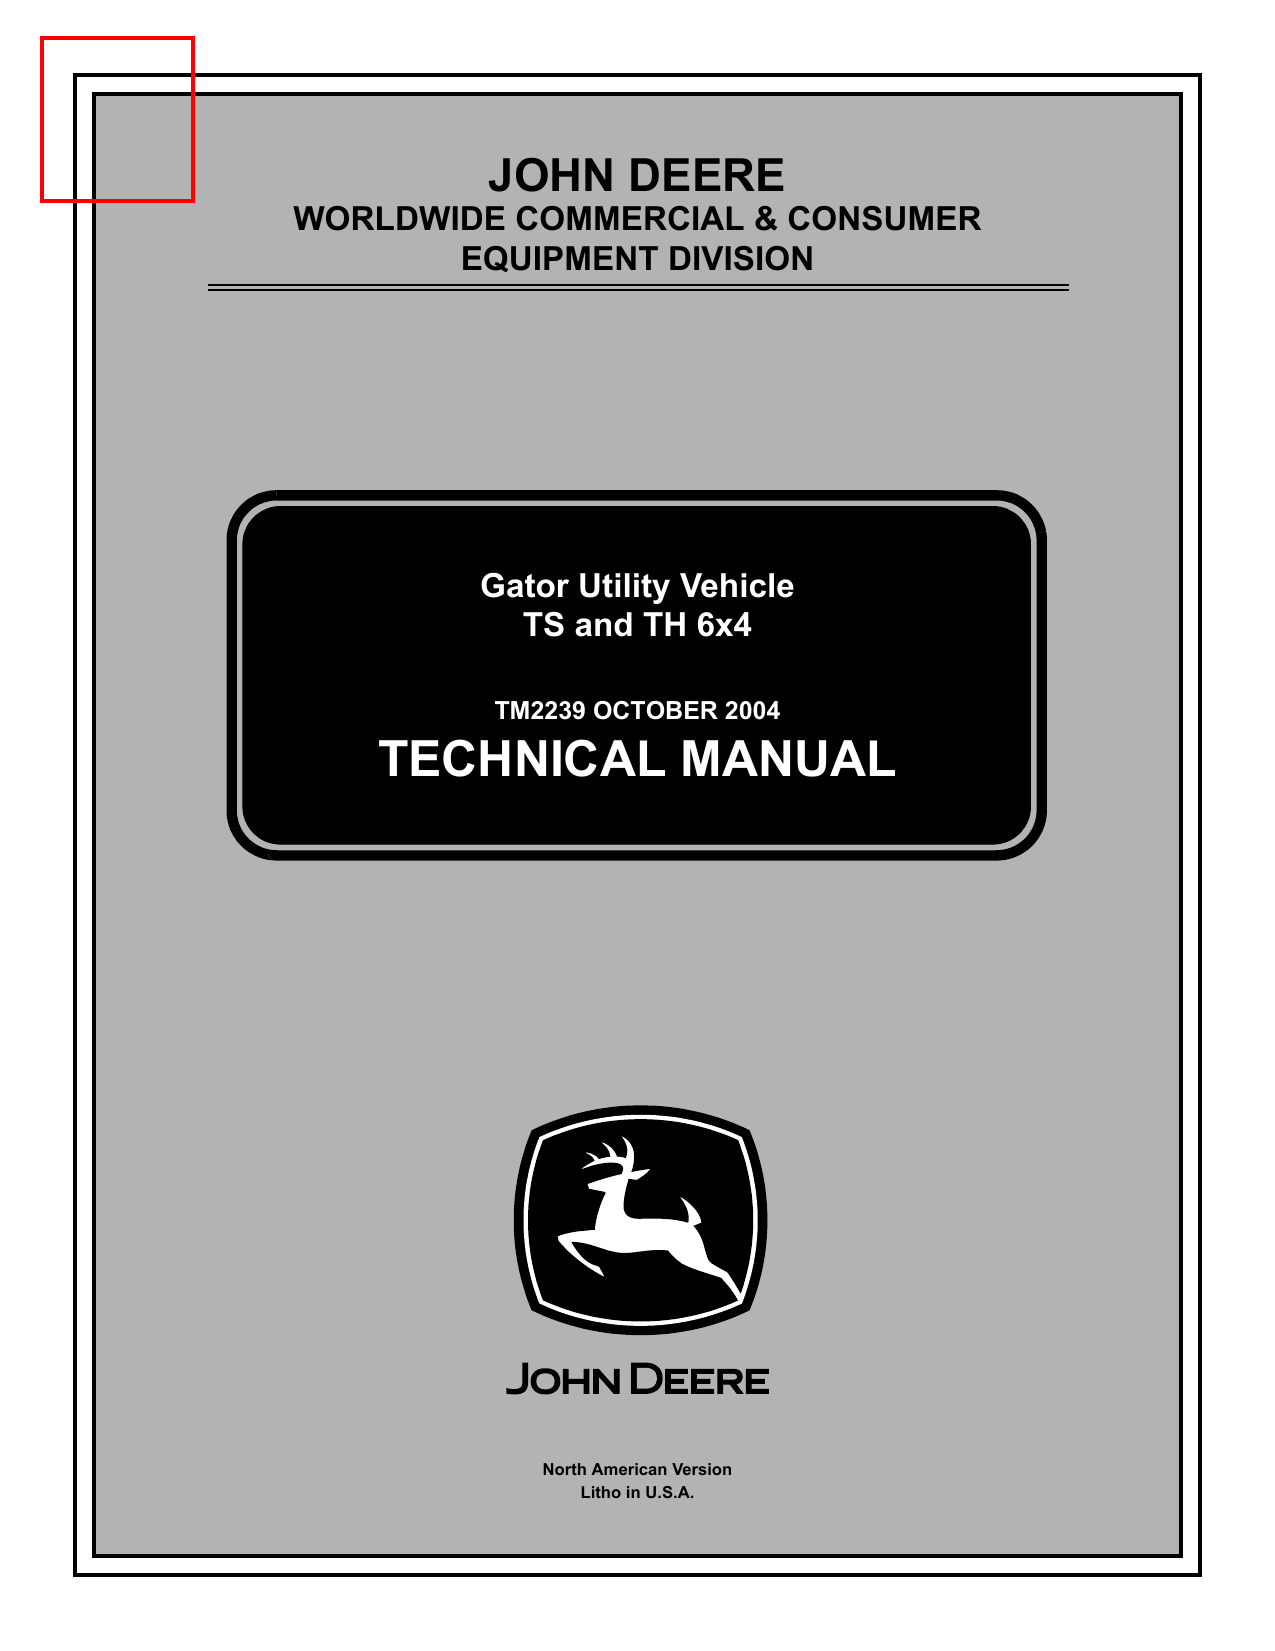 John Deere Gator TS and TH 6x4 technical manual -  Preview image 1